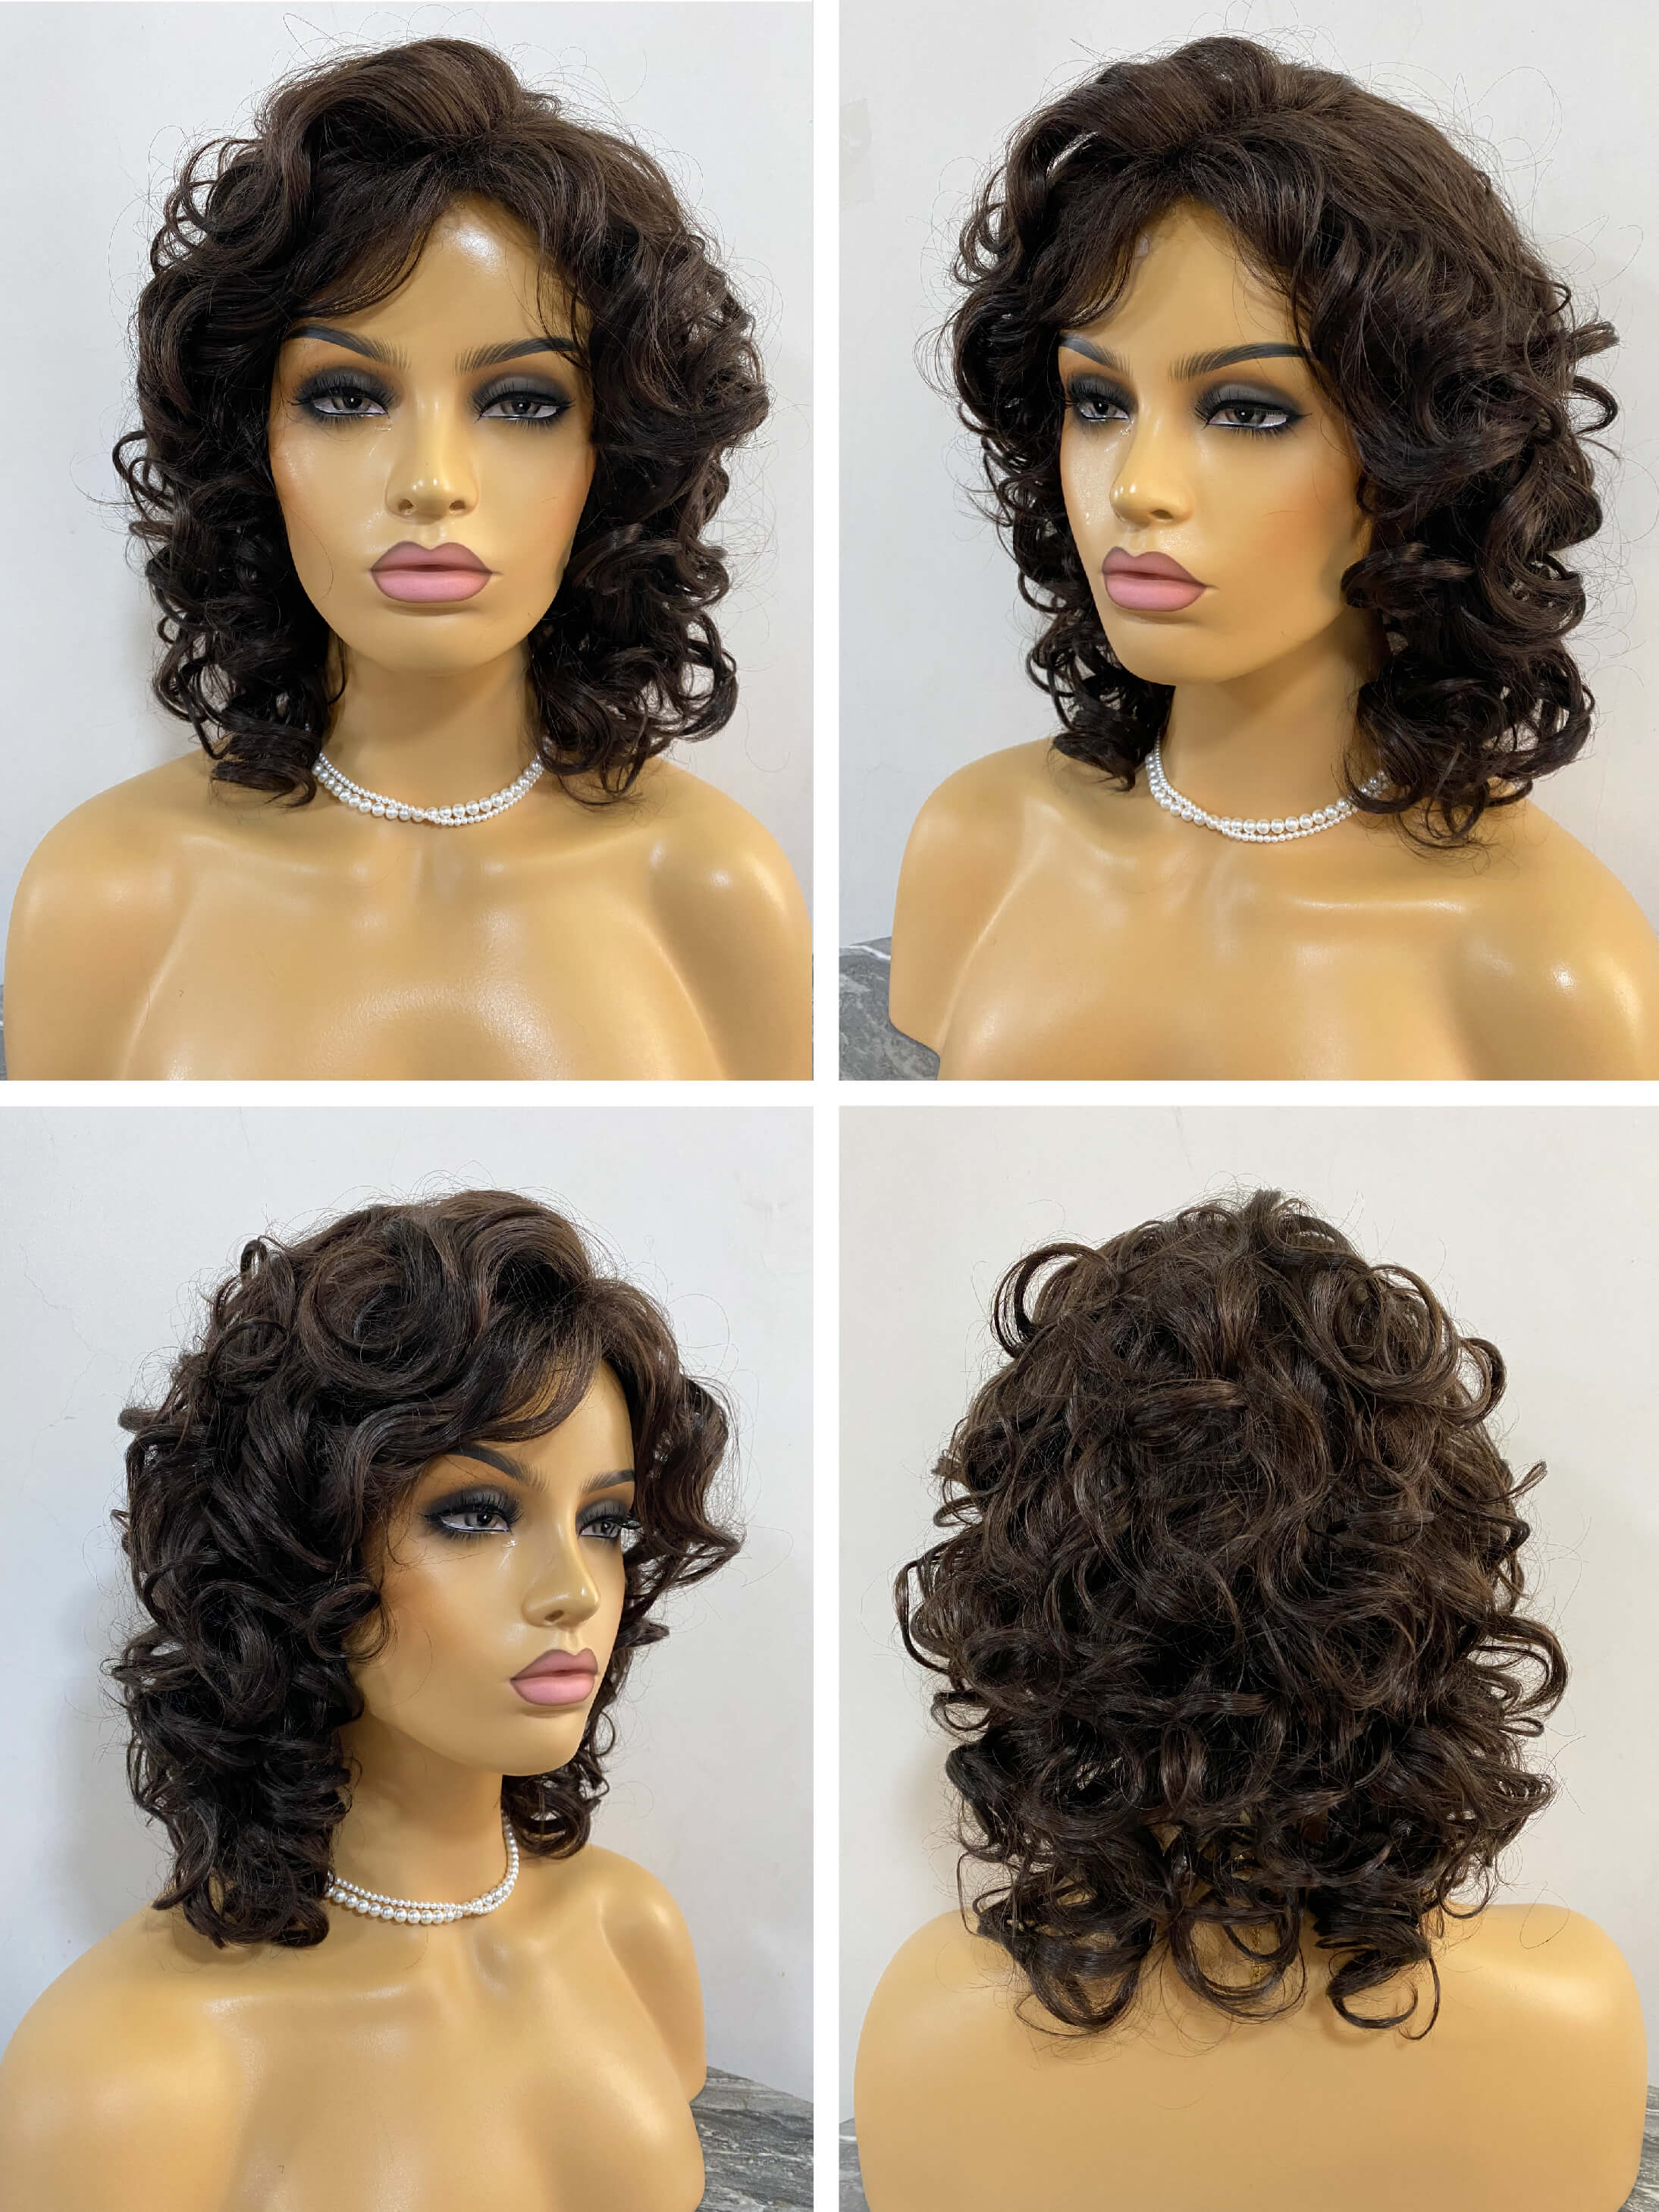 Shoulder Length Cut Spiral Curls Synthetic Wigs With Bangs By imwigs®